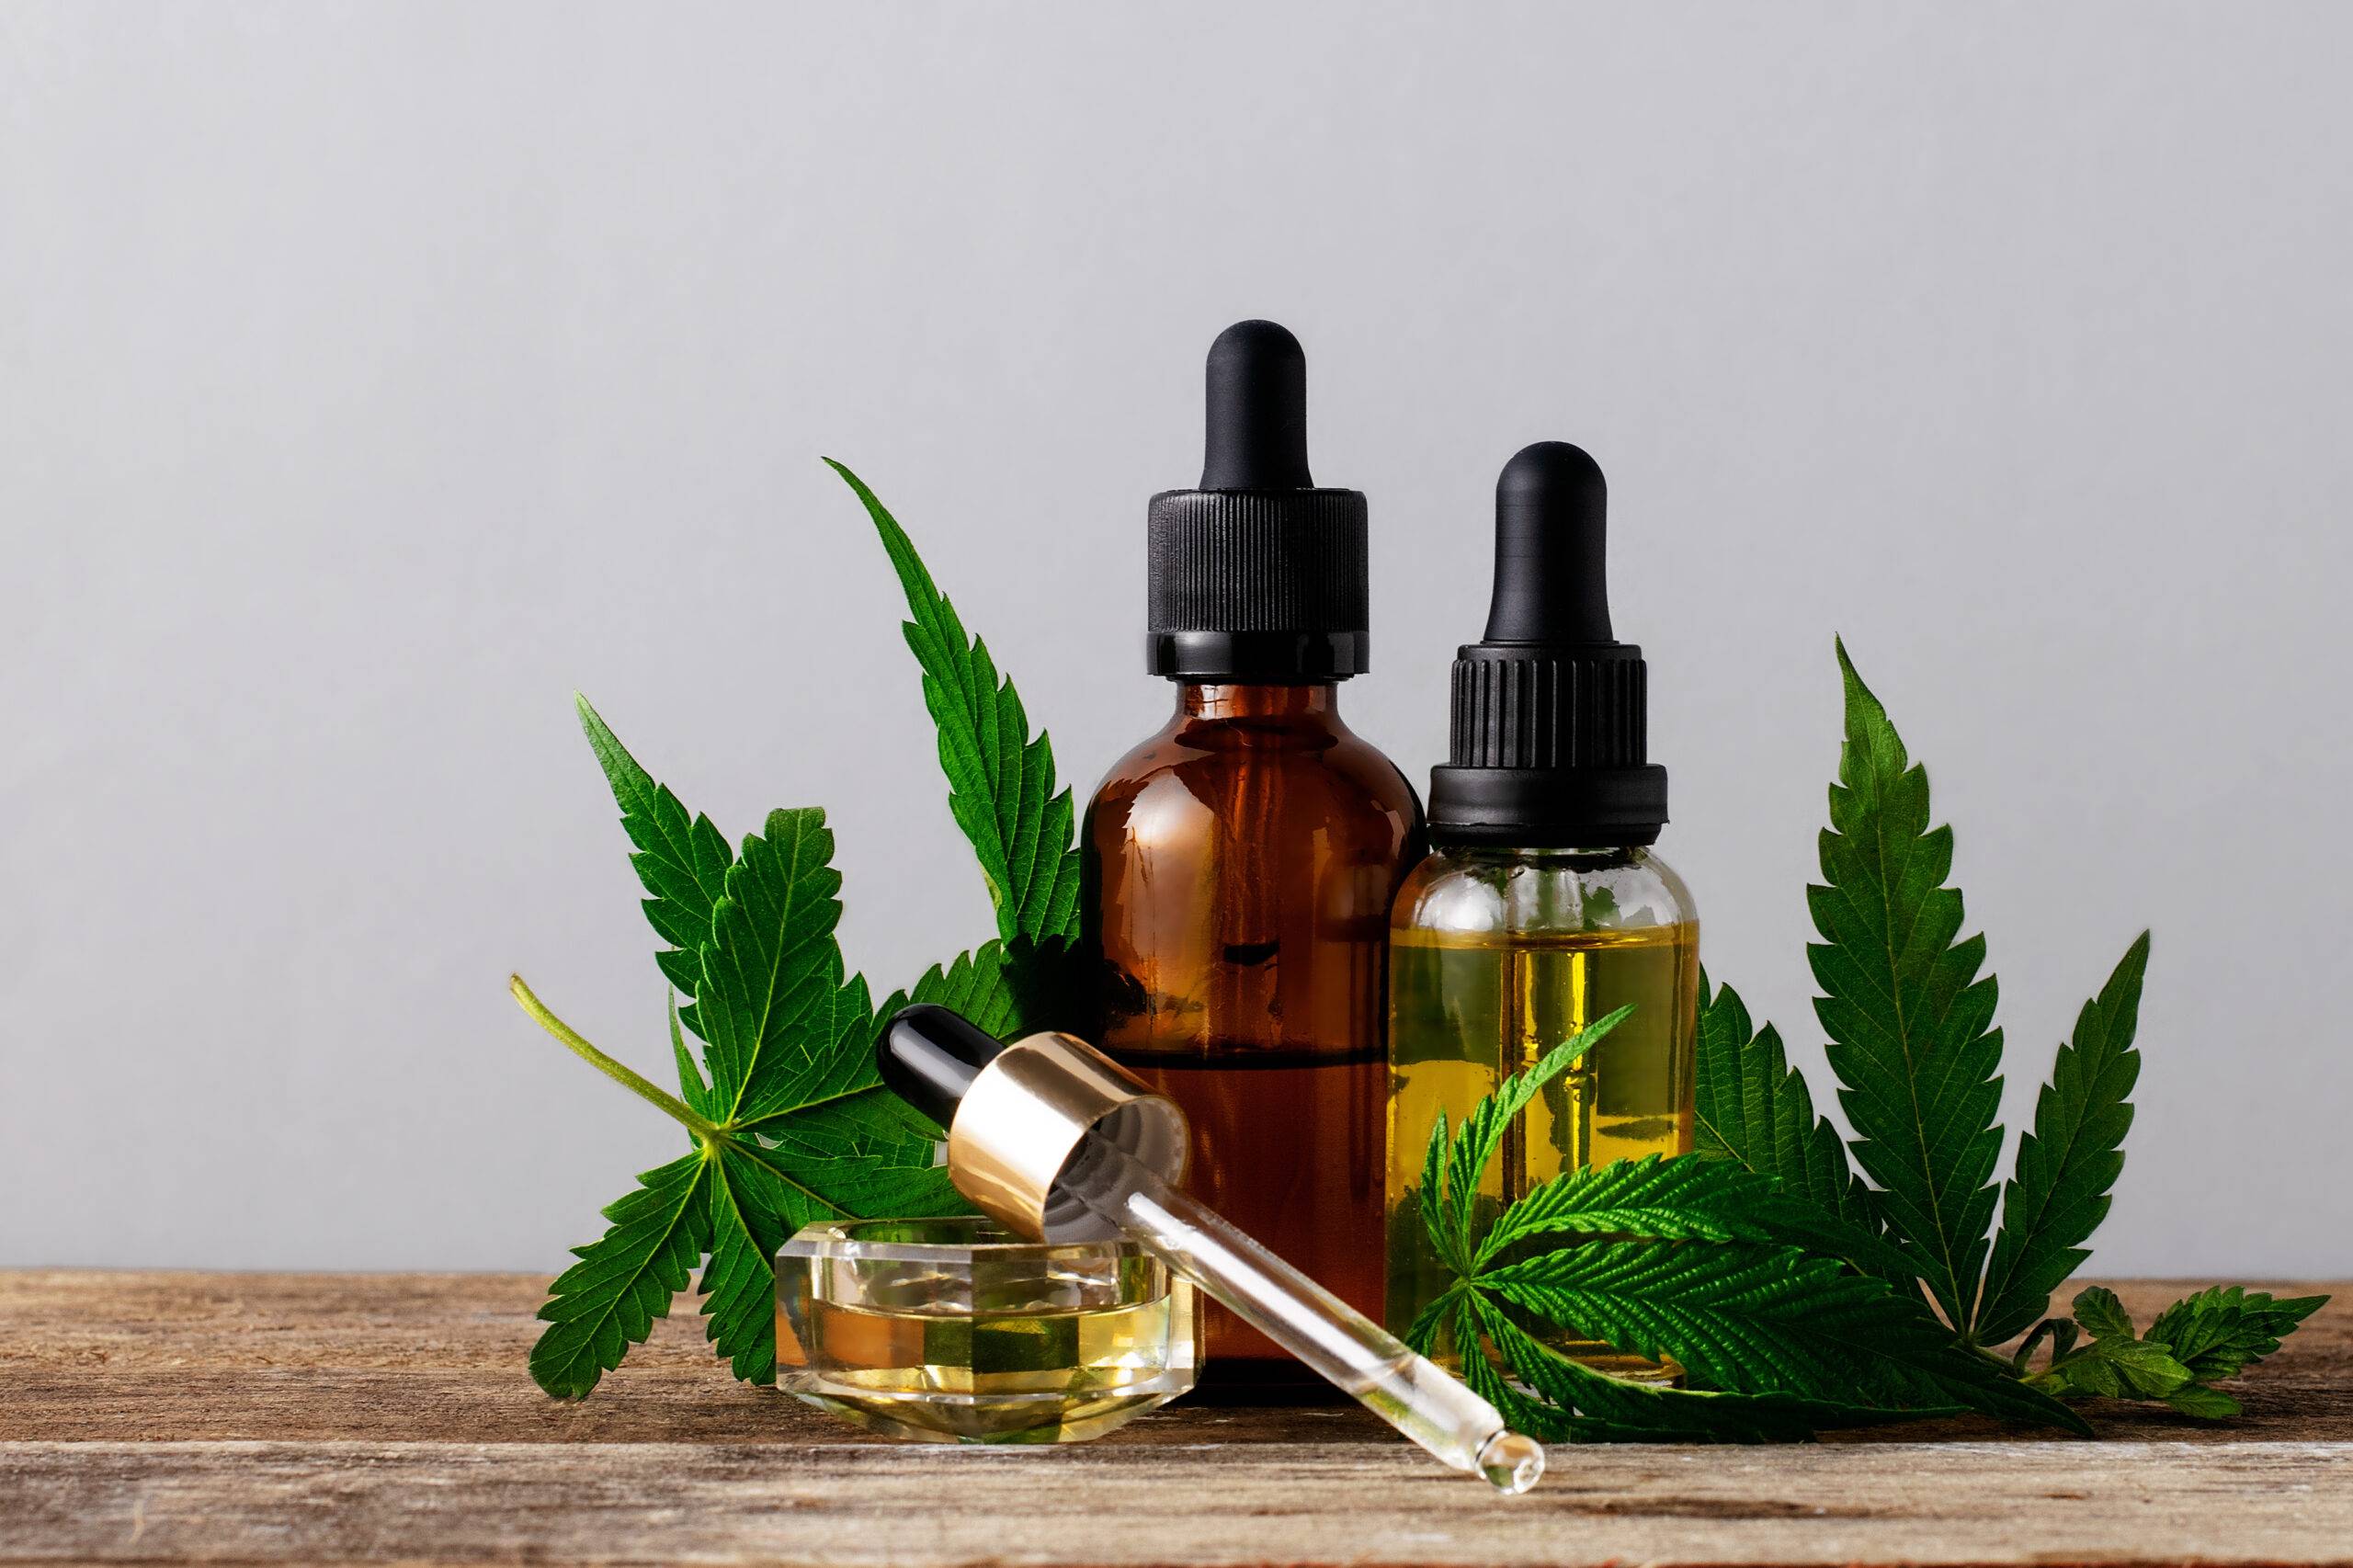 CBD oil bottles with droppers and cannabis leaves displayed.